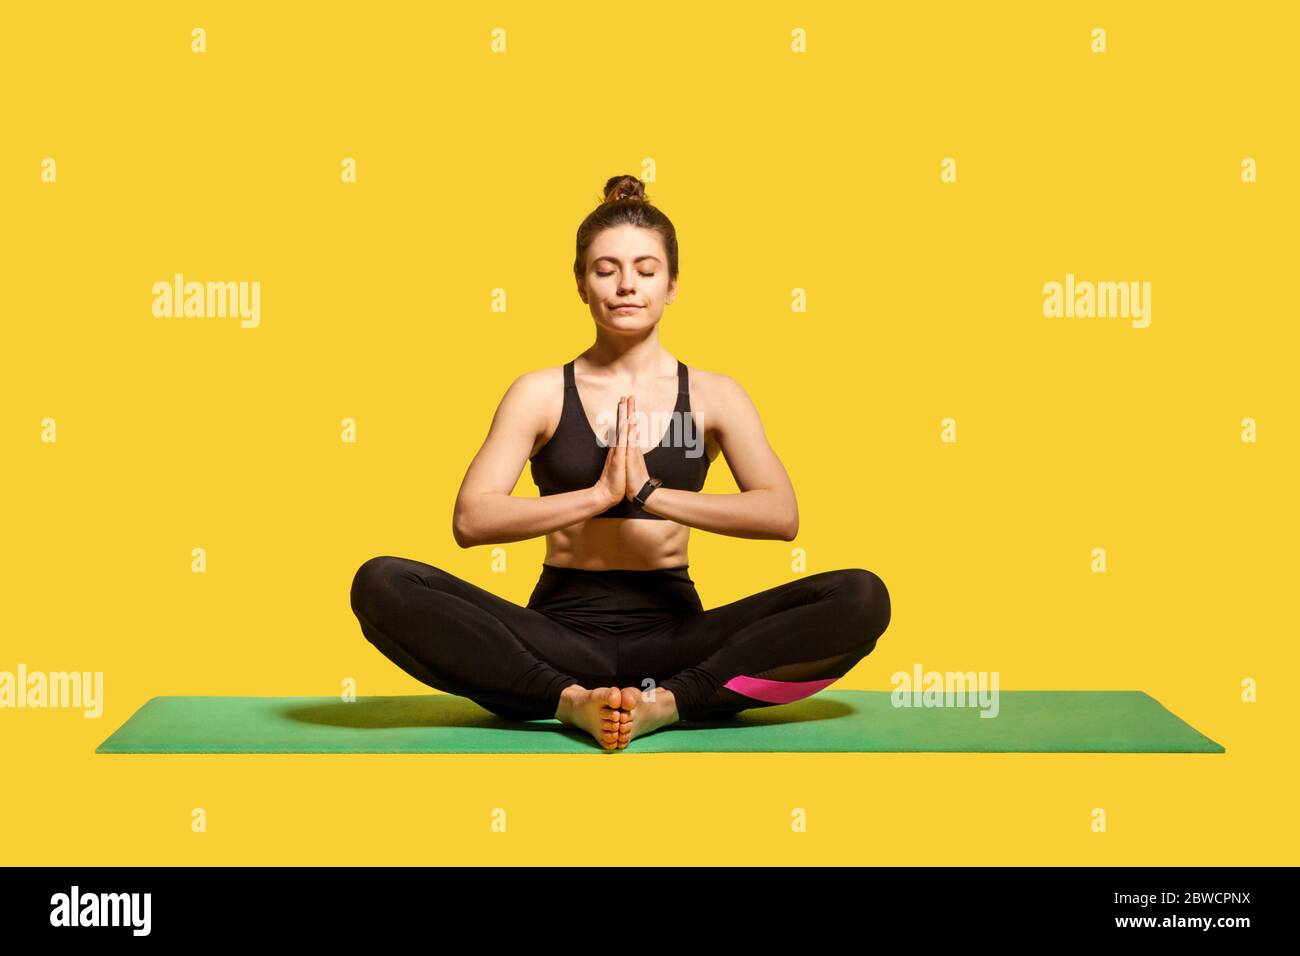 Concentrated peaceful woman with hair bun in tight sportswear sitting on mat practicing yoga, holding hands in namaste gesture and meditating, relaxin Stock Photo